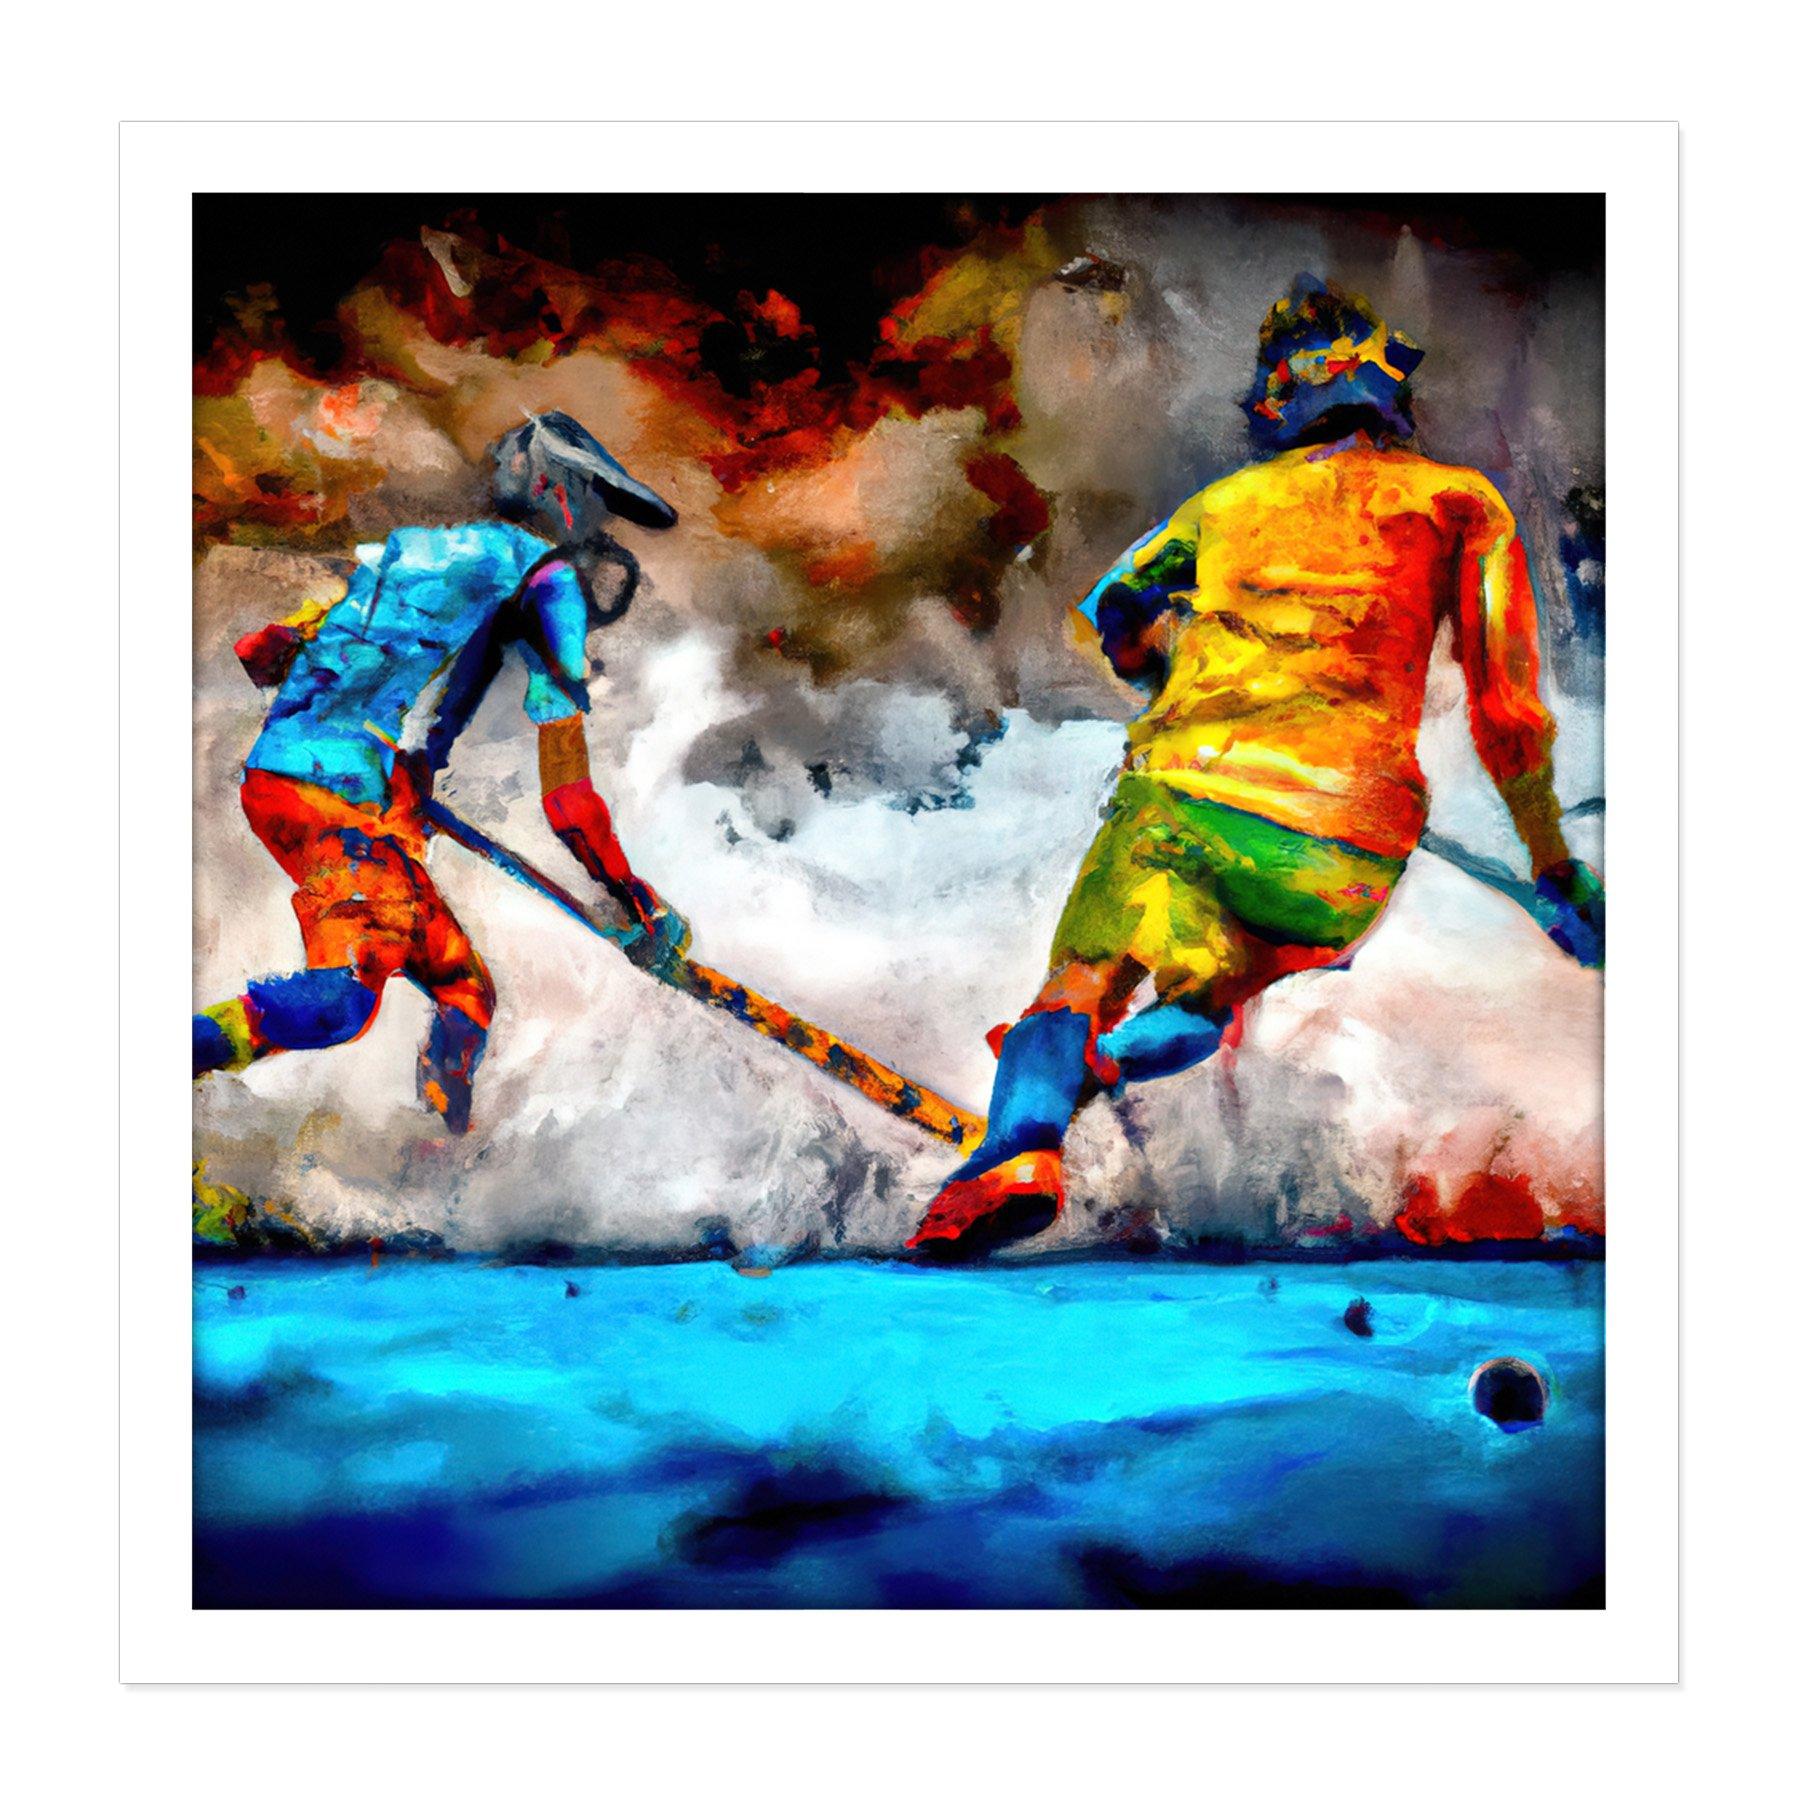 Field Hockey Players Action Abstract Oil Painting Square Framed Wall Art Print Picture 16X16 Inch